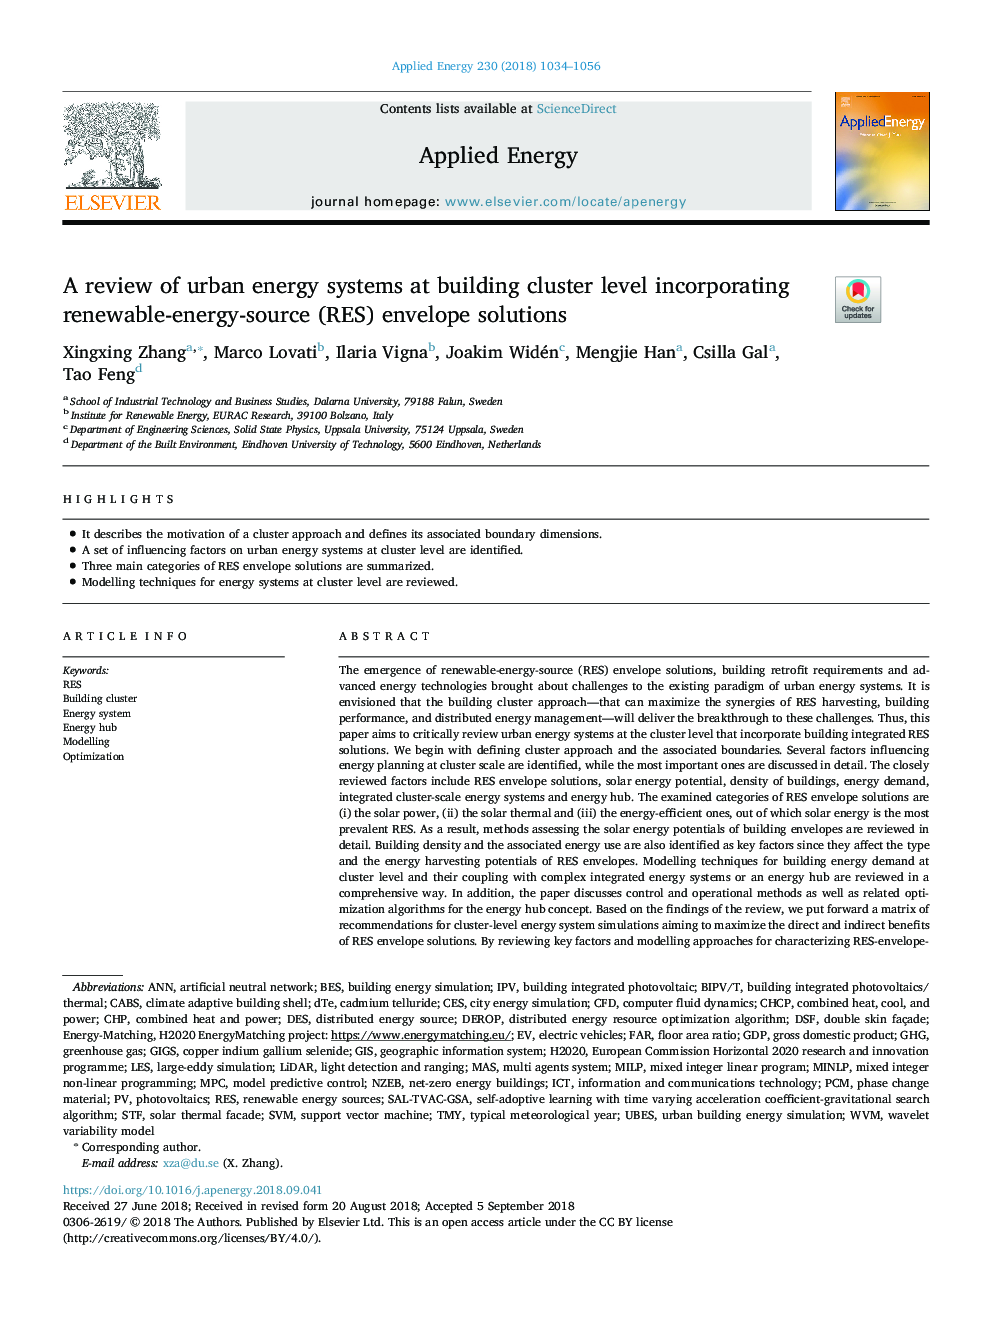 A review of urban energy systems at building cluster level incorporating renewable-energy-source (RES) envelope solutions